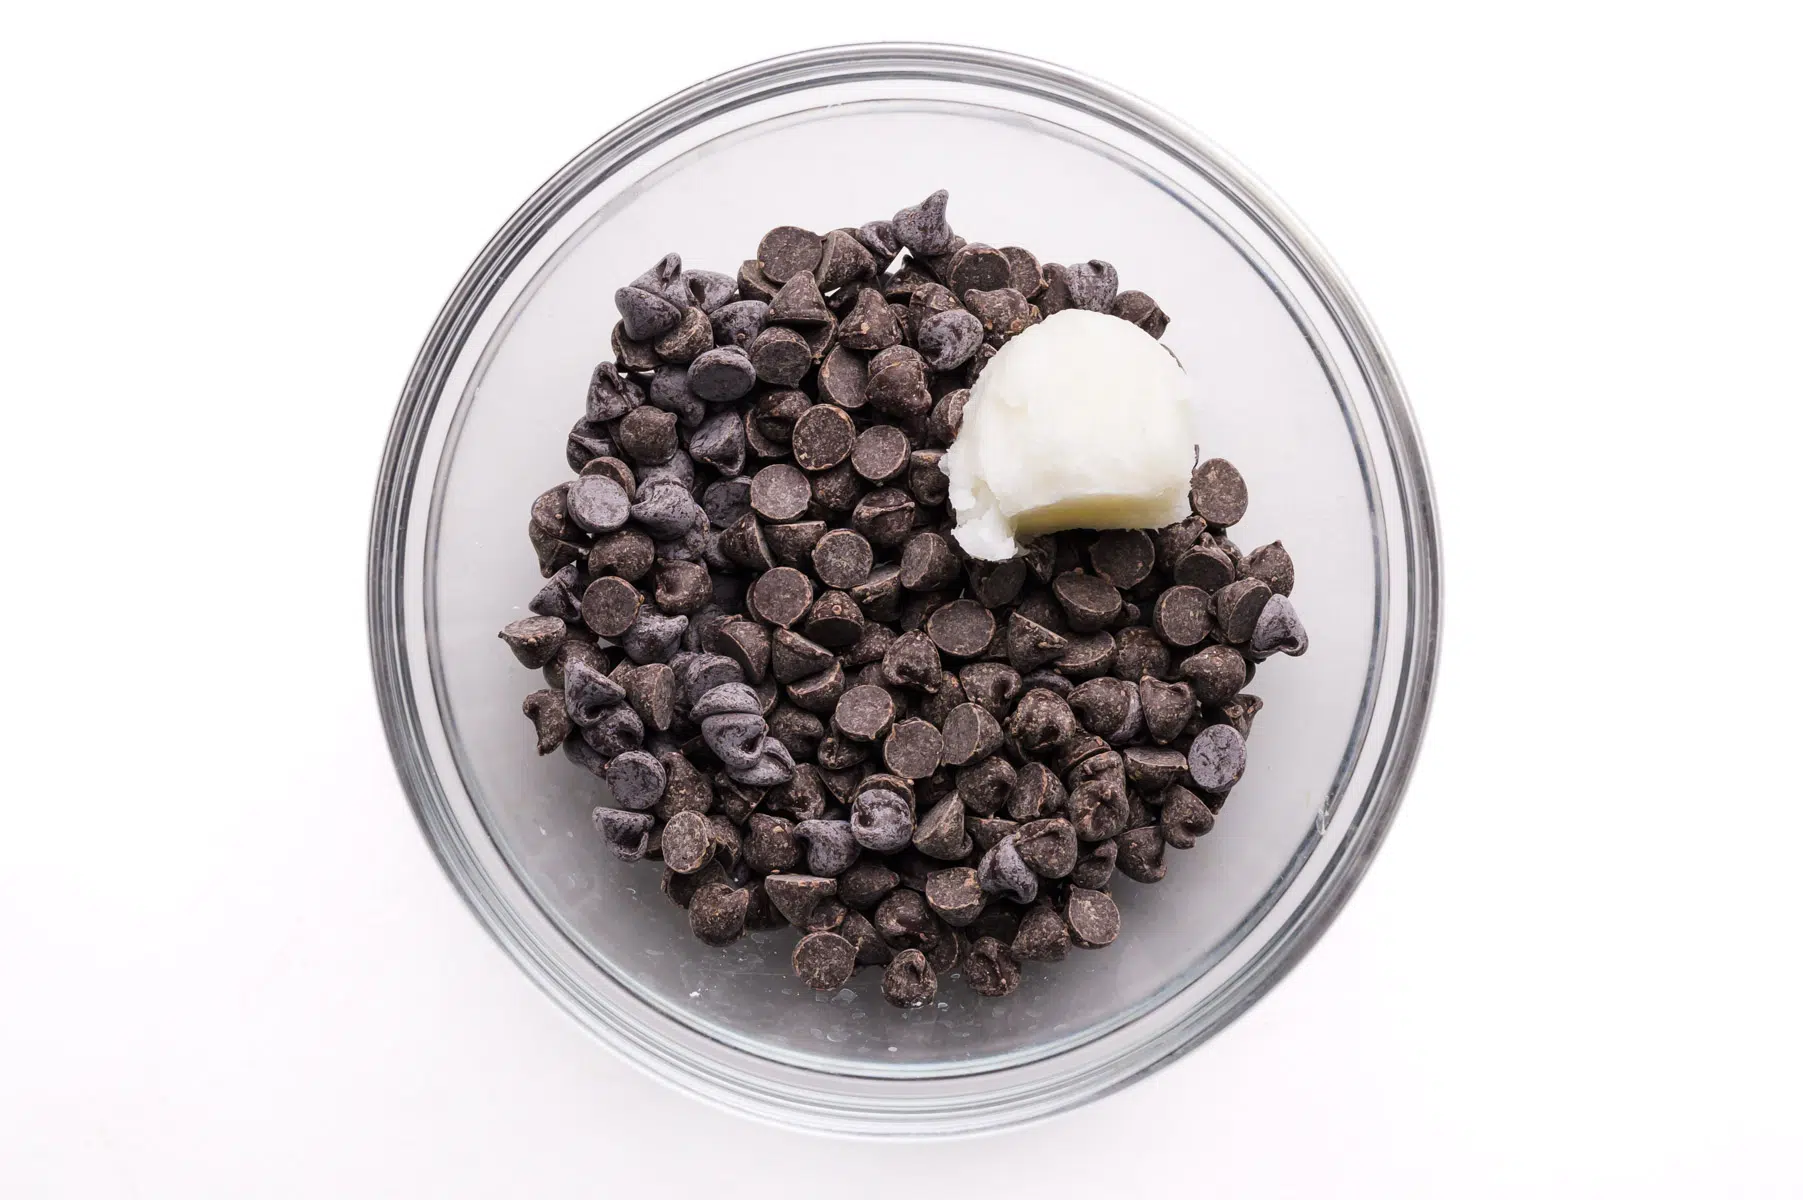 Chocolate chips and coconut oil are combined in a bowl.